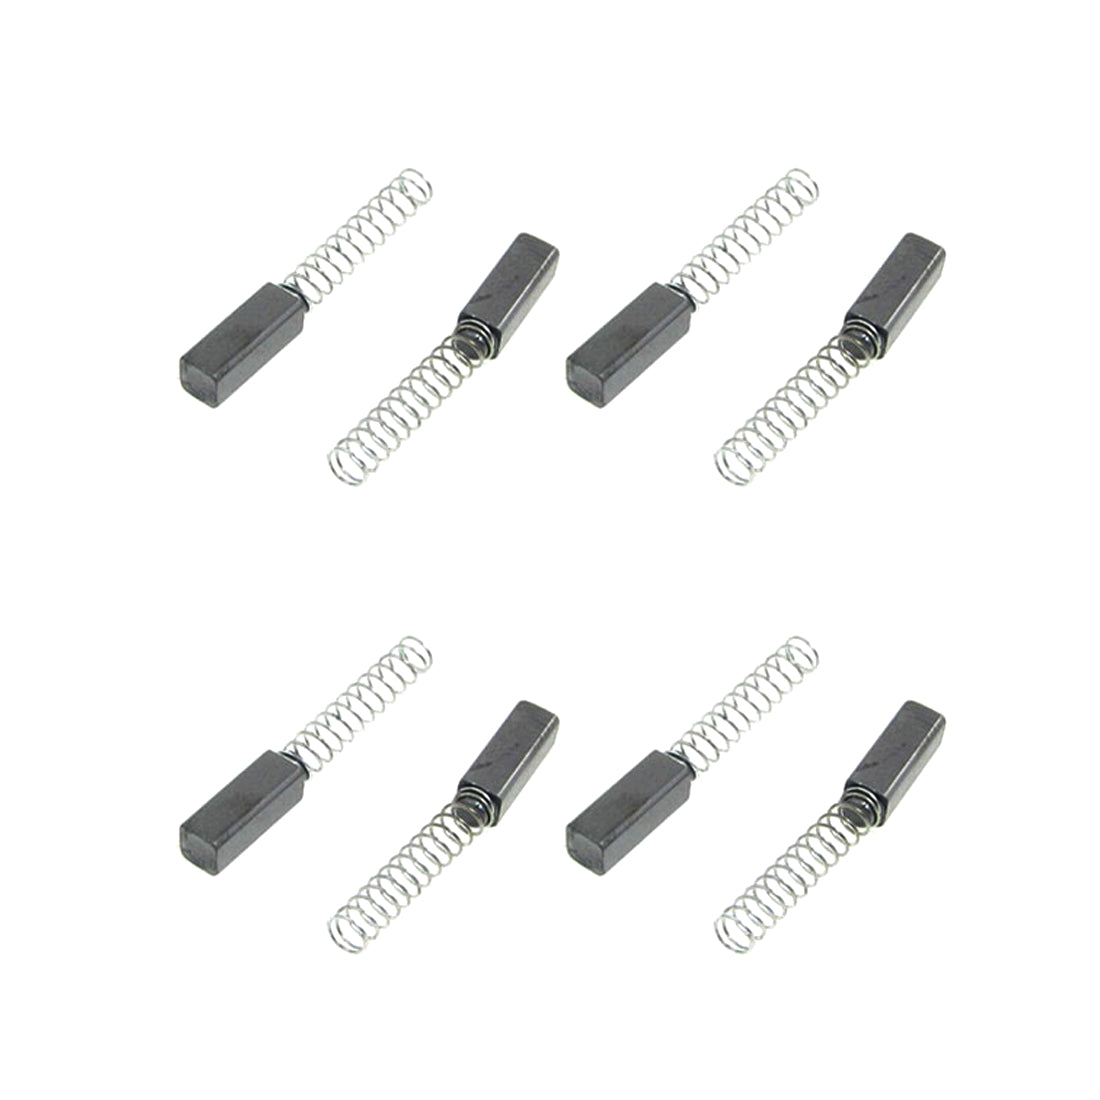 uxcell Uxcell 8 Pcs Electric Drill Motor Carbon Brushes 11mm x 4mm x 4mm